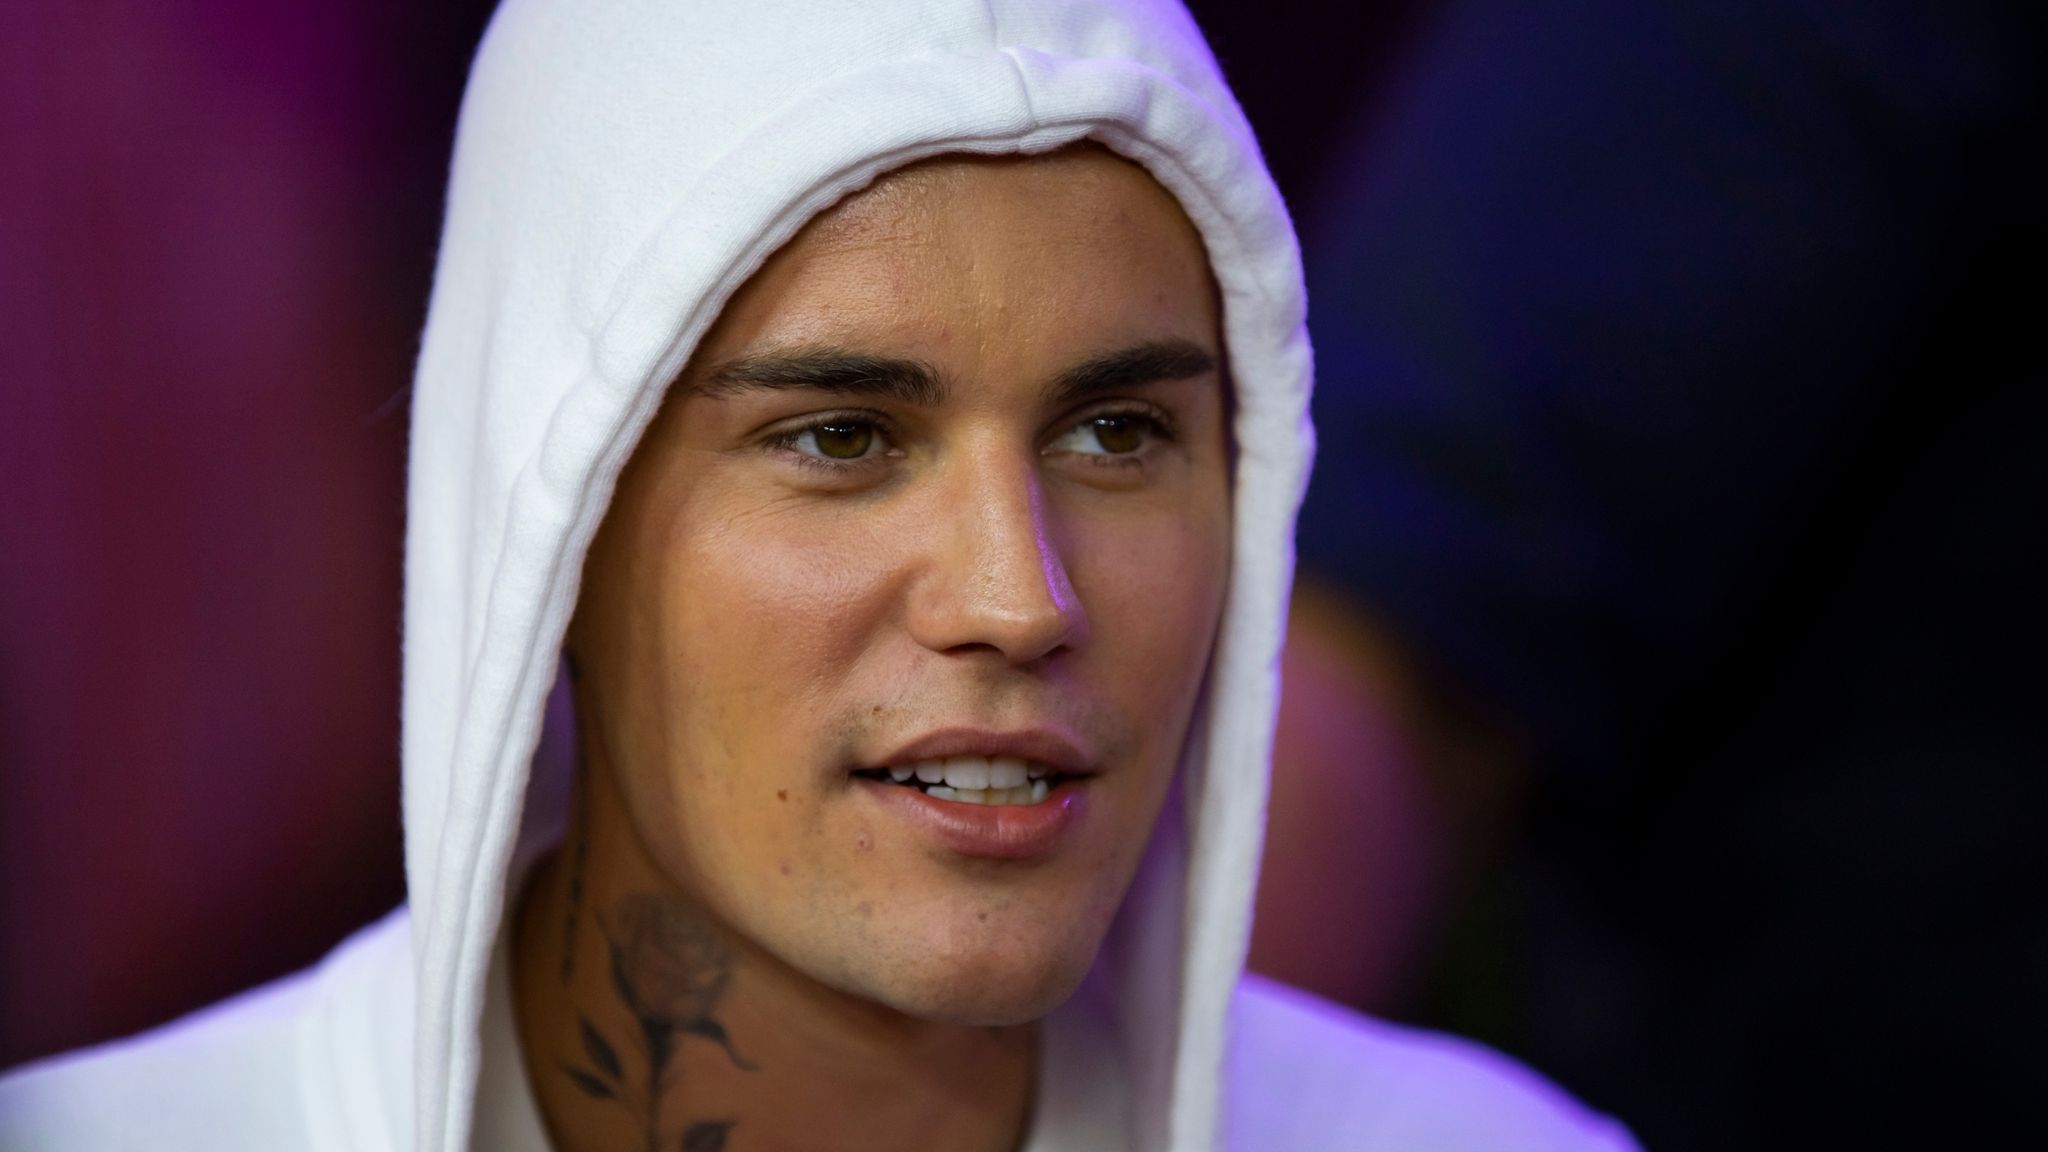 Justin Bieber sells rights to 'Baby,' rest of music catalog